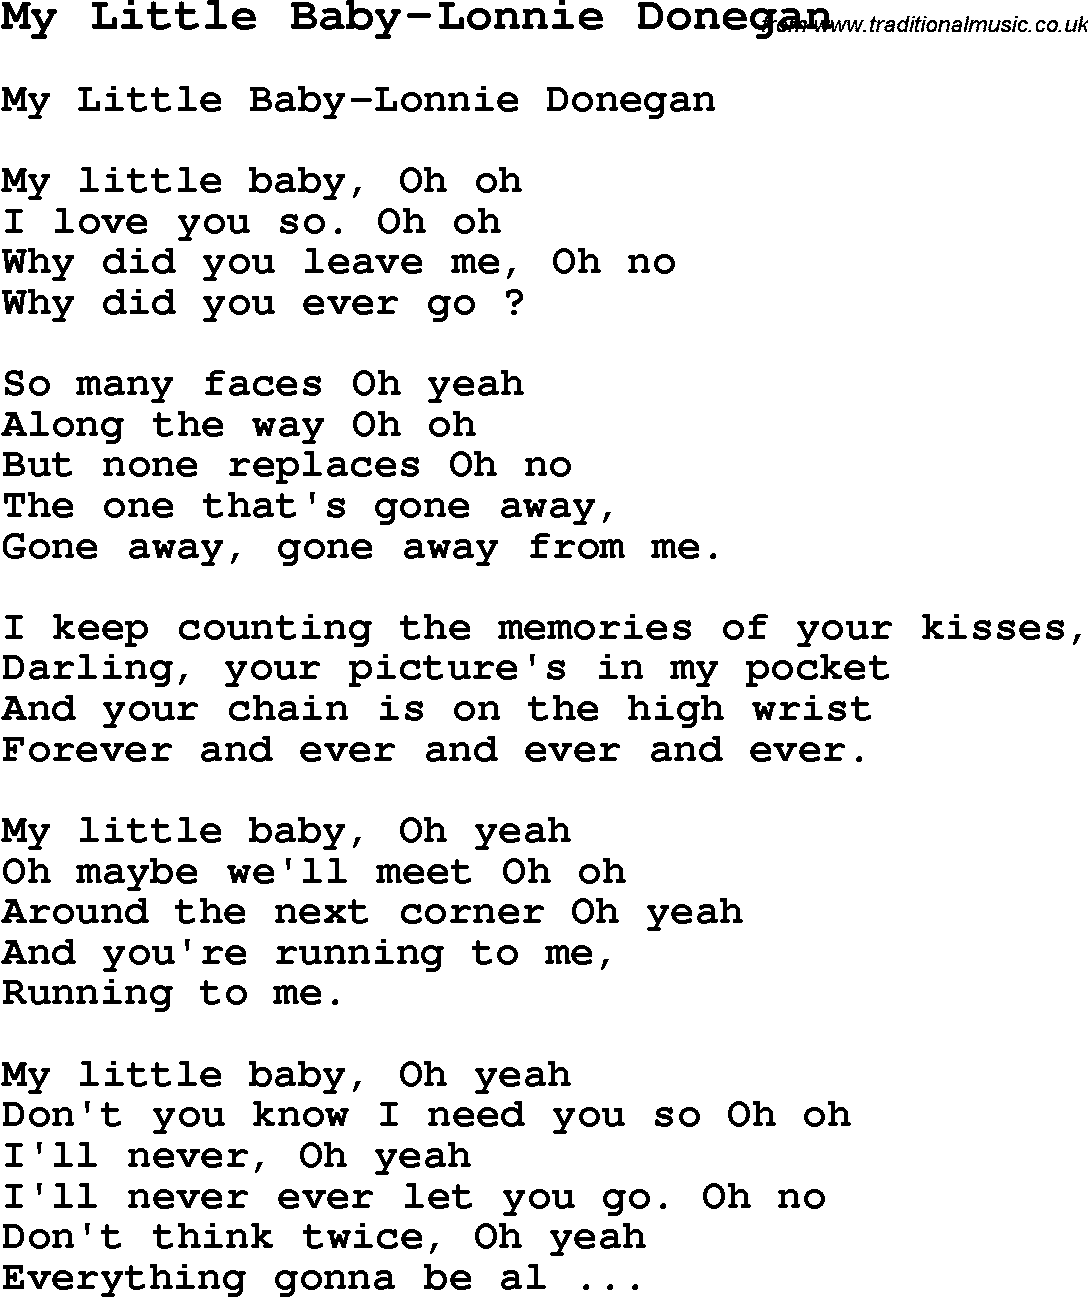 Skiffle Song Lyrics for My Little Baby-Lonnie Donegan.